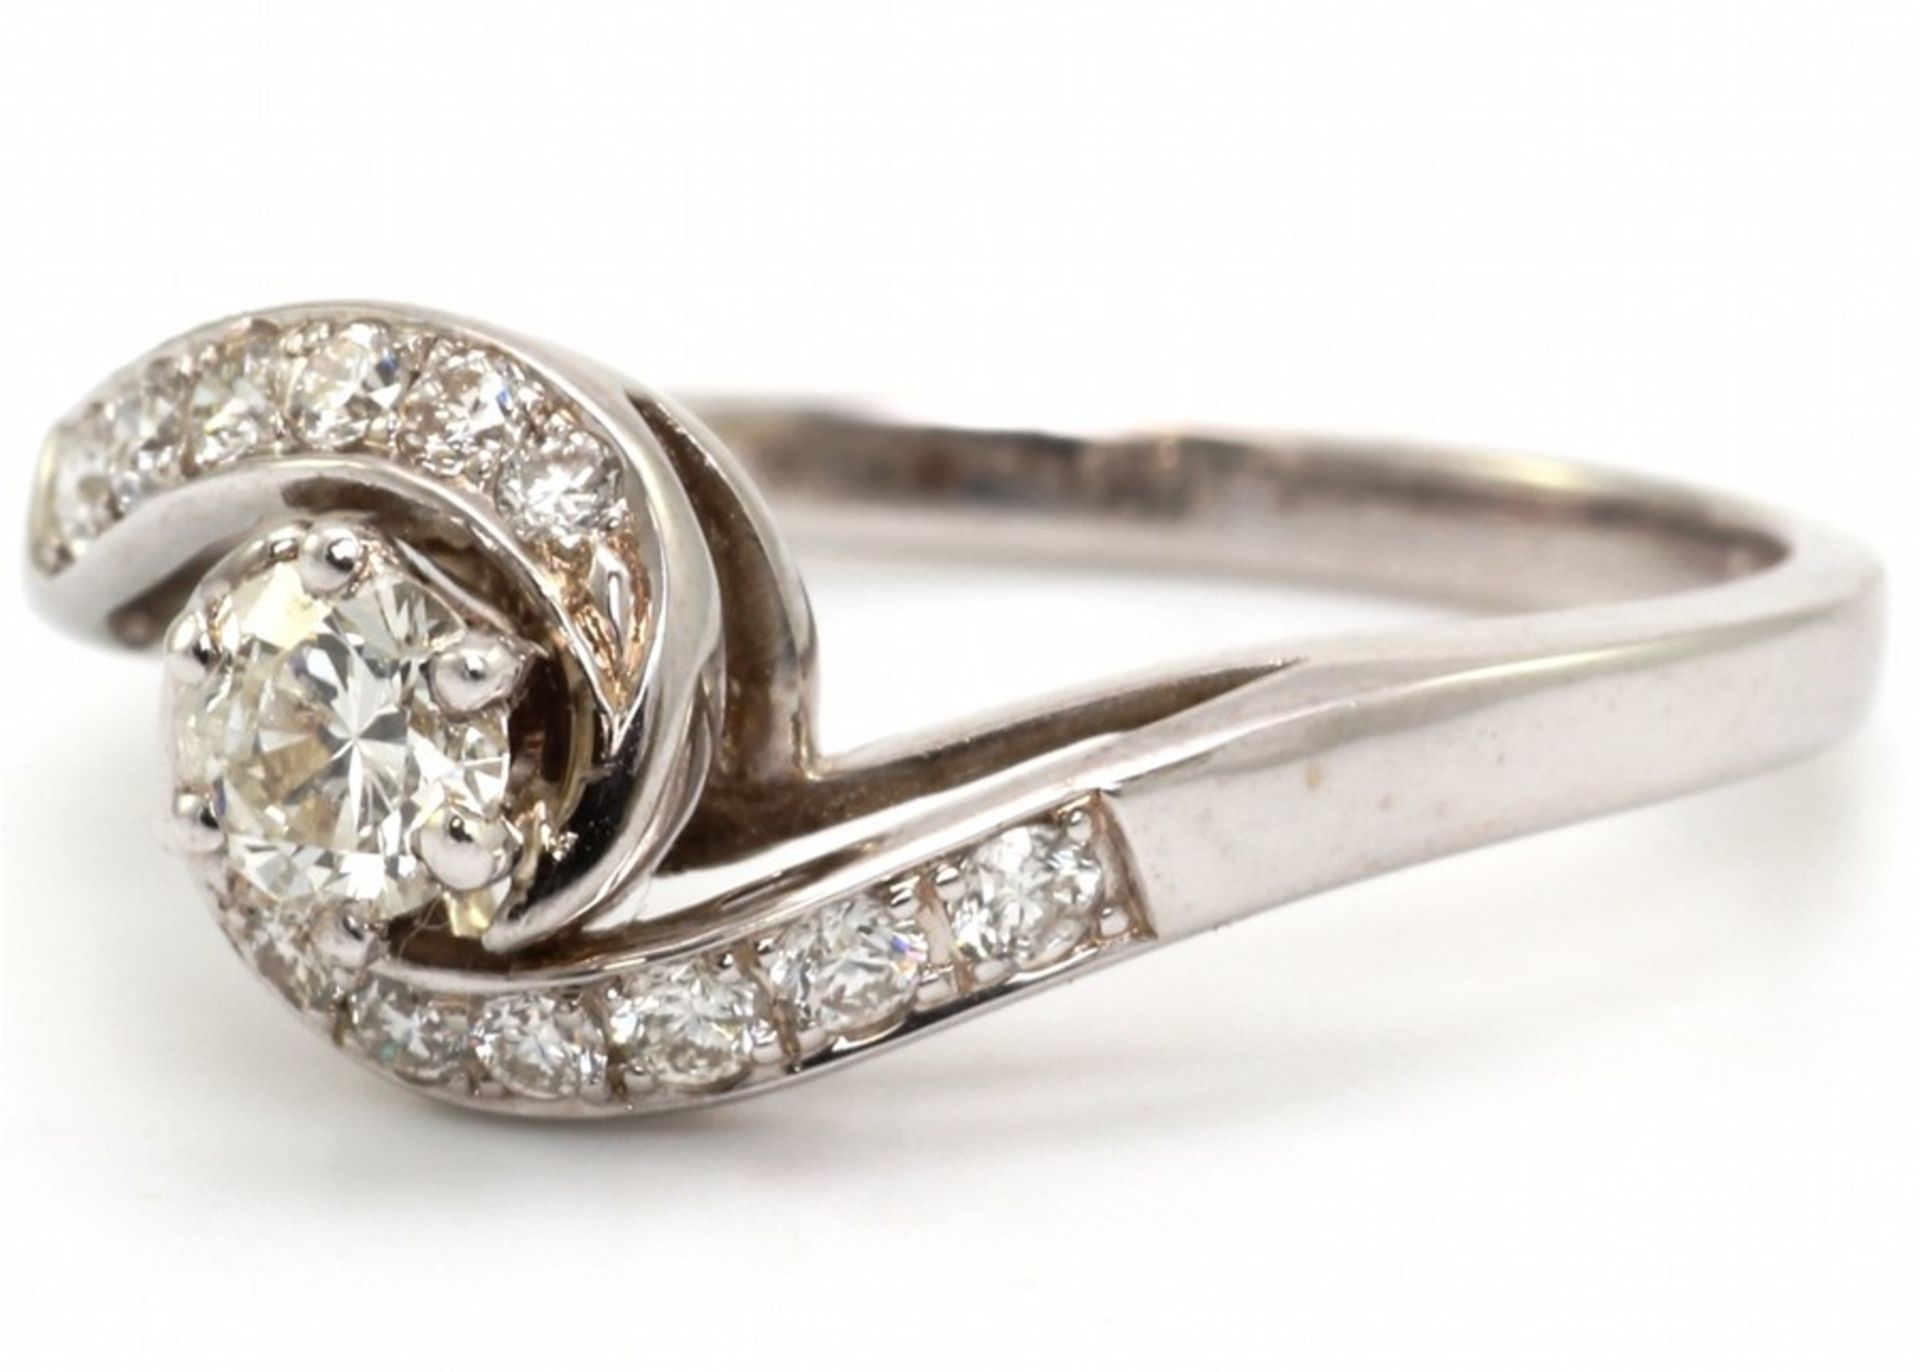 18ct White Gold Single Stone Twist Shoulders Diamond Ring Valued by AGI £2,365.00 - Image 2 of 4